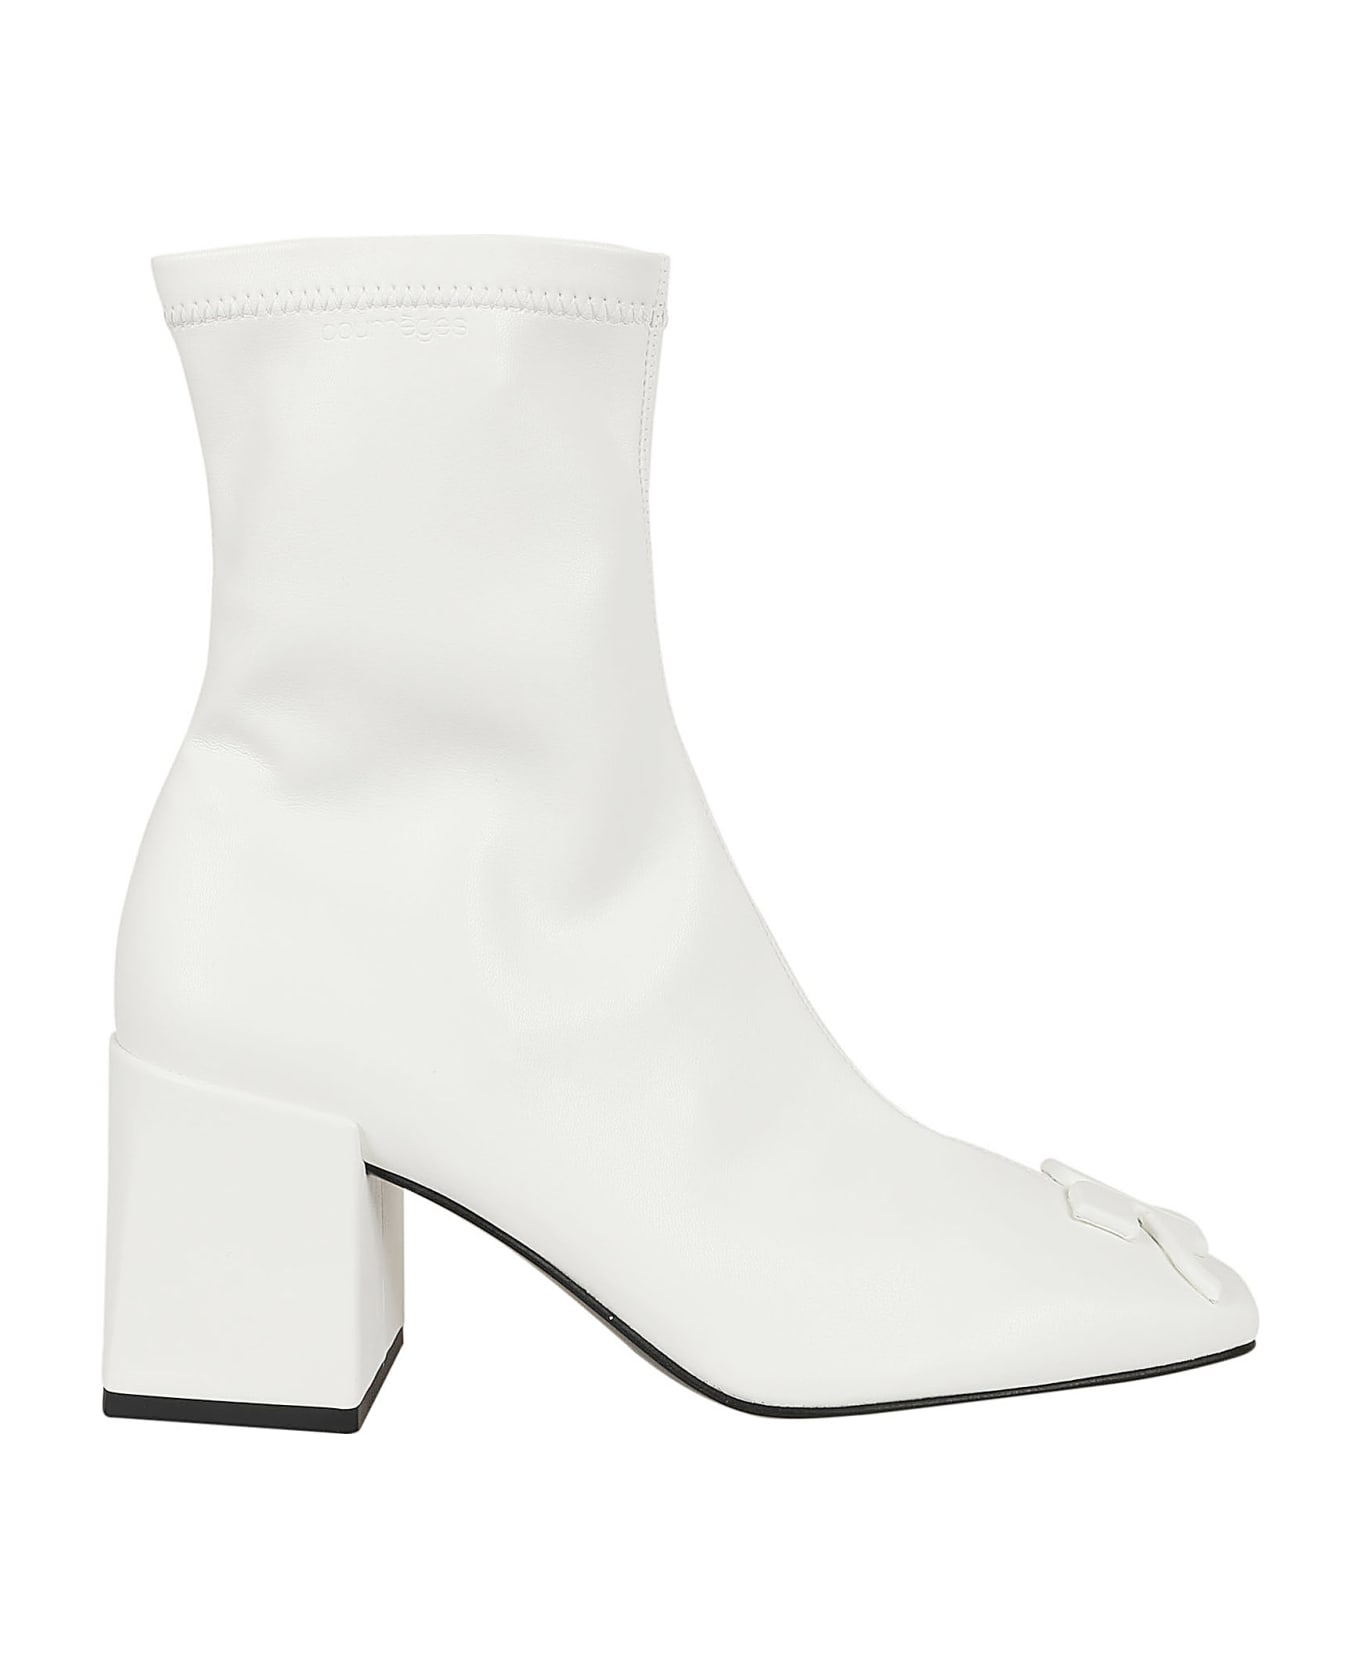 Courrèges Reedition Eco-leather Ac Ankle Boots - Heritage White ブーツ